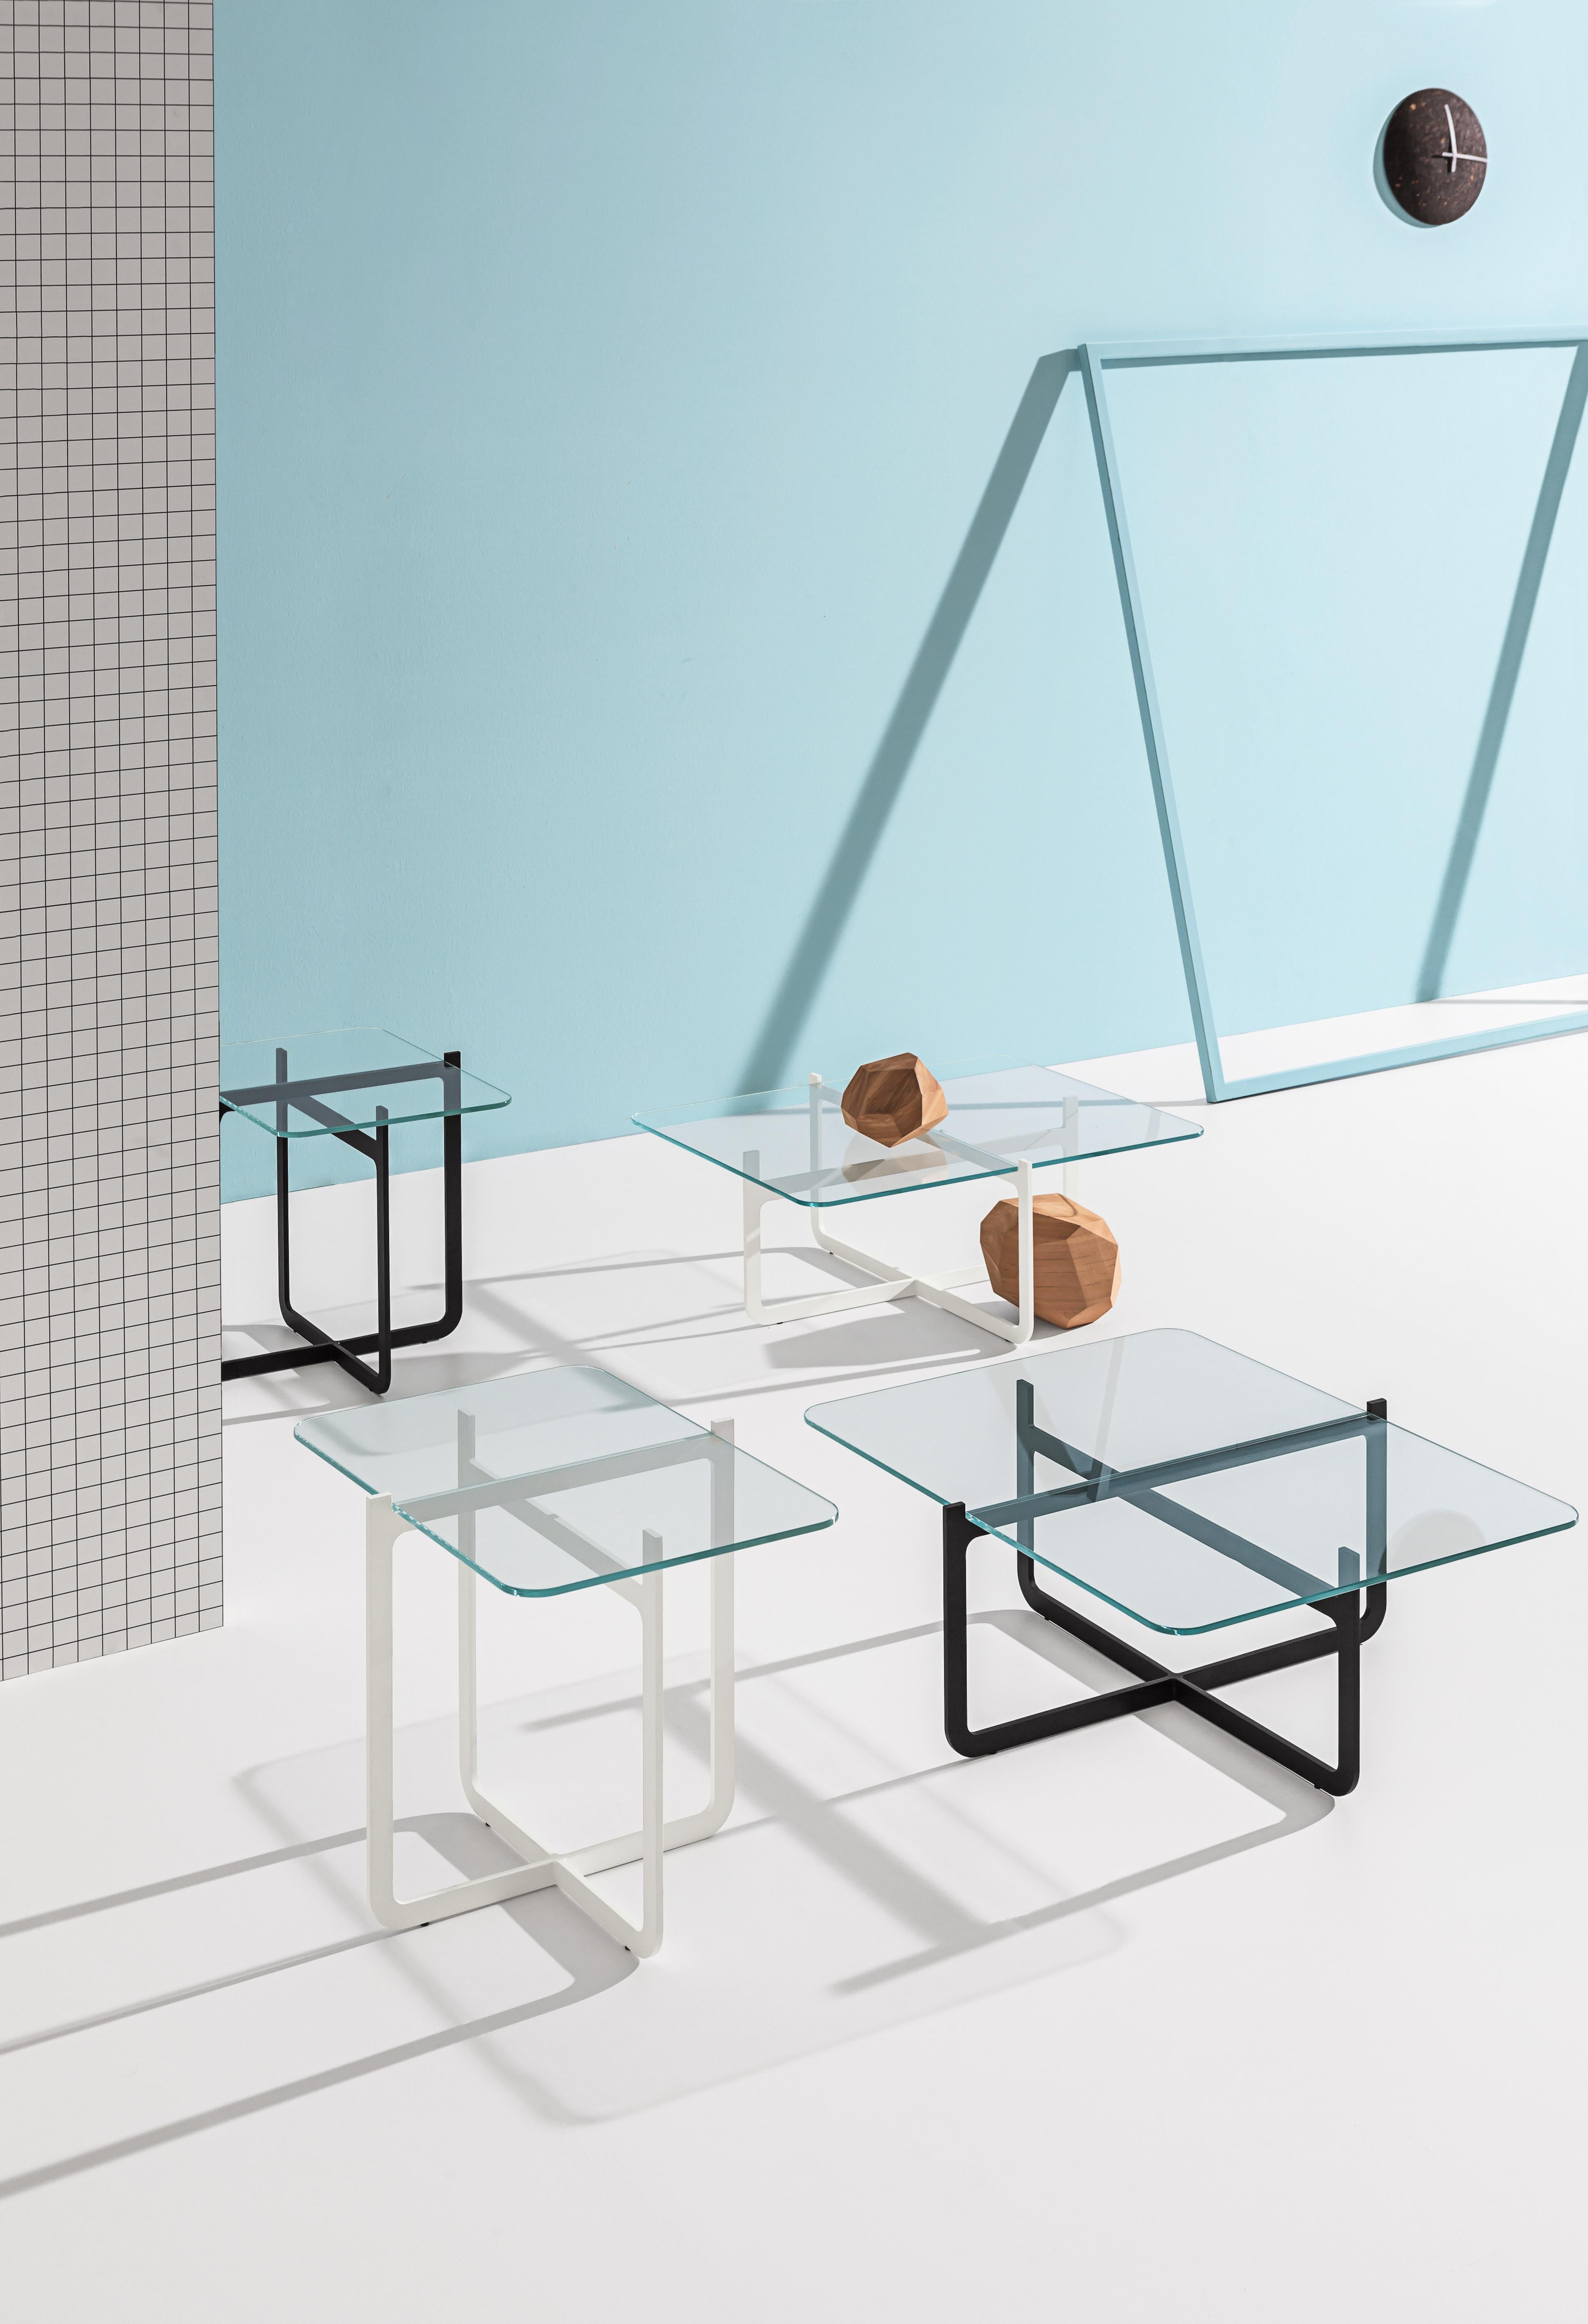 Coffee table with laser-cut, welded metal lacquered in black and tempered extra clear glass top.

Nendo seeks simplicity and minimalism with this combination of metal and glass. Clip comes to life from the concept of two steel sheets cut out like